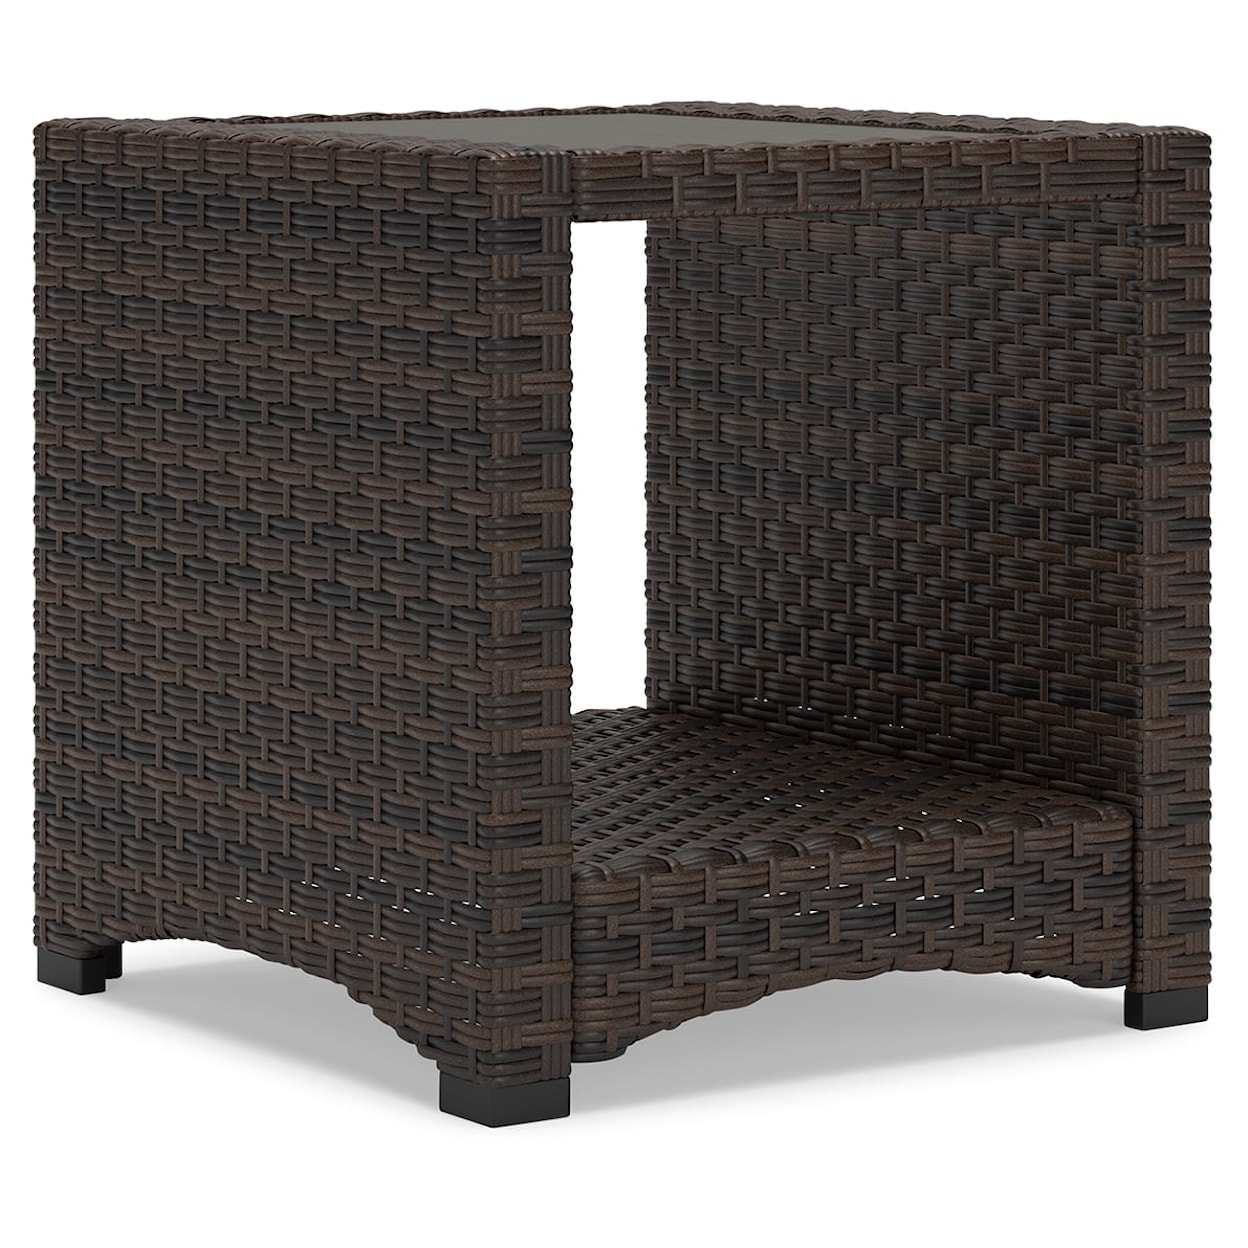 Signature Design by Ashley Windglow Outdoor Square End Table